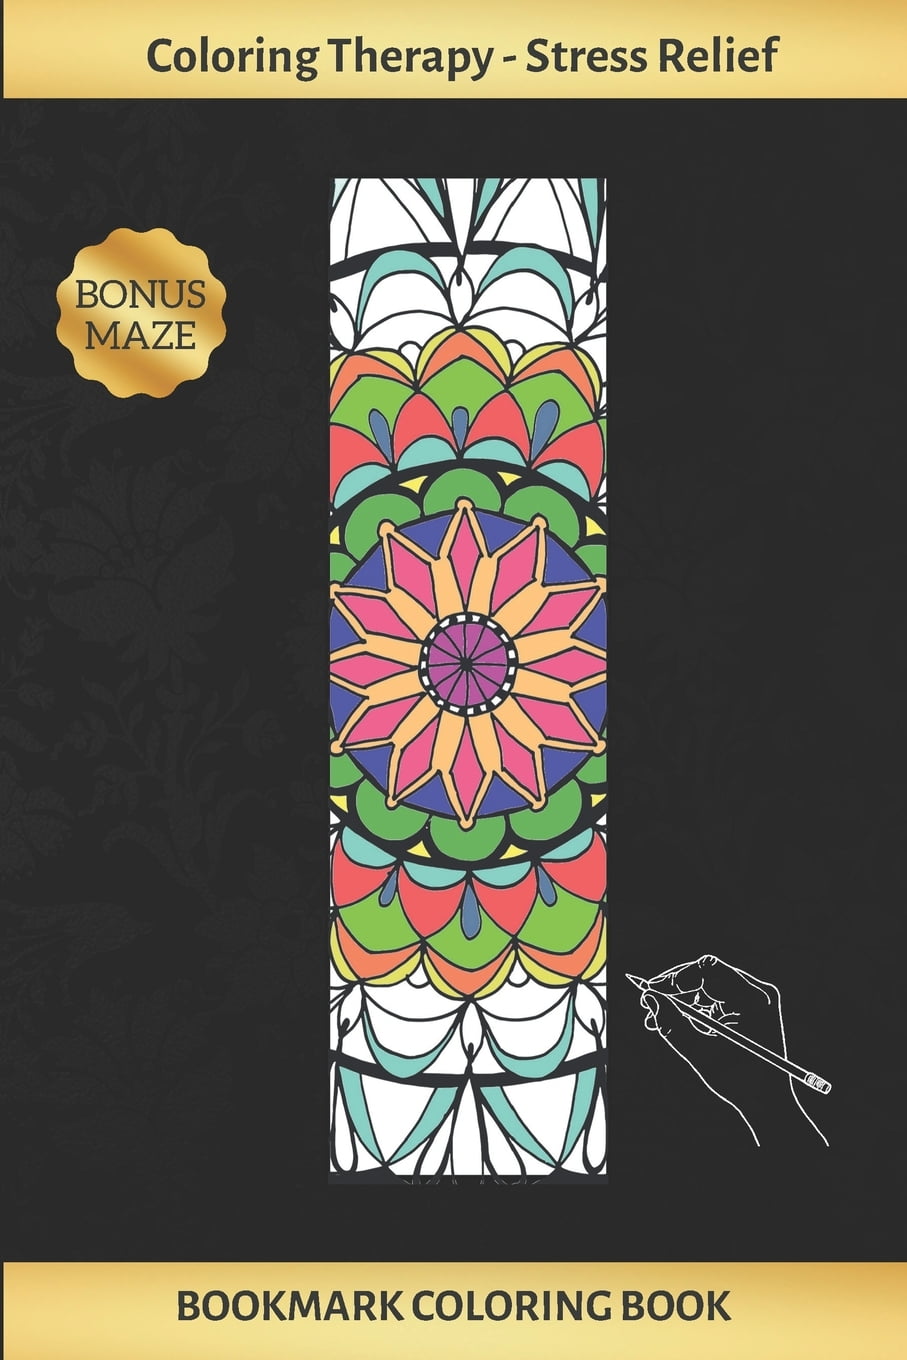 Bookmark Coloring Book: Art Therapy for Adults - Stress Relieving Mandala  Design - Create and Crop Your Own Bookmarks - Reduce Anxiety - Bonus Maze -  Creative Birthday/Christmas Gift. (Paperback) 